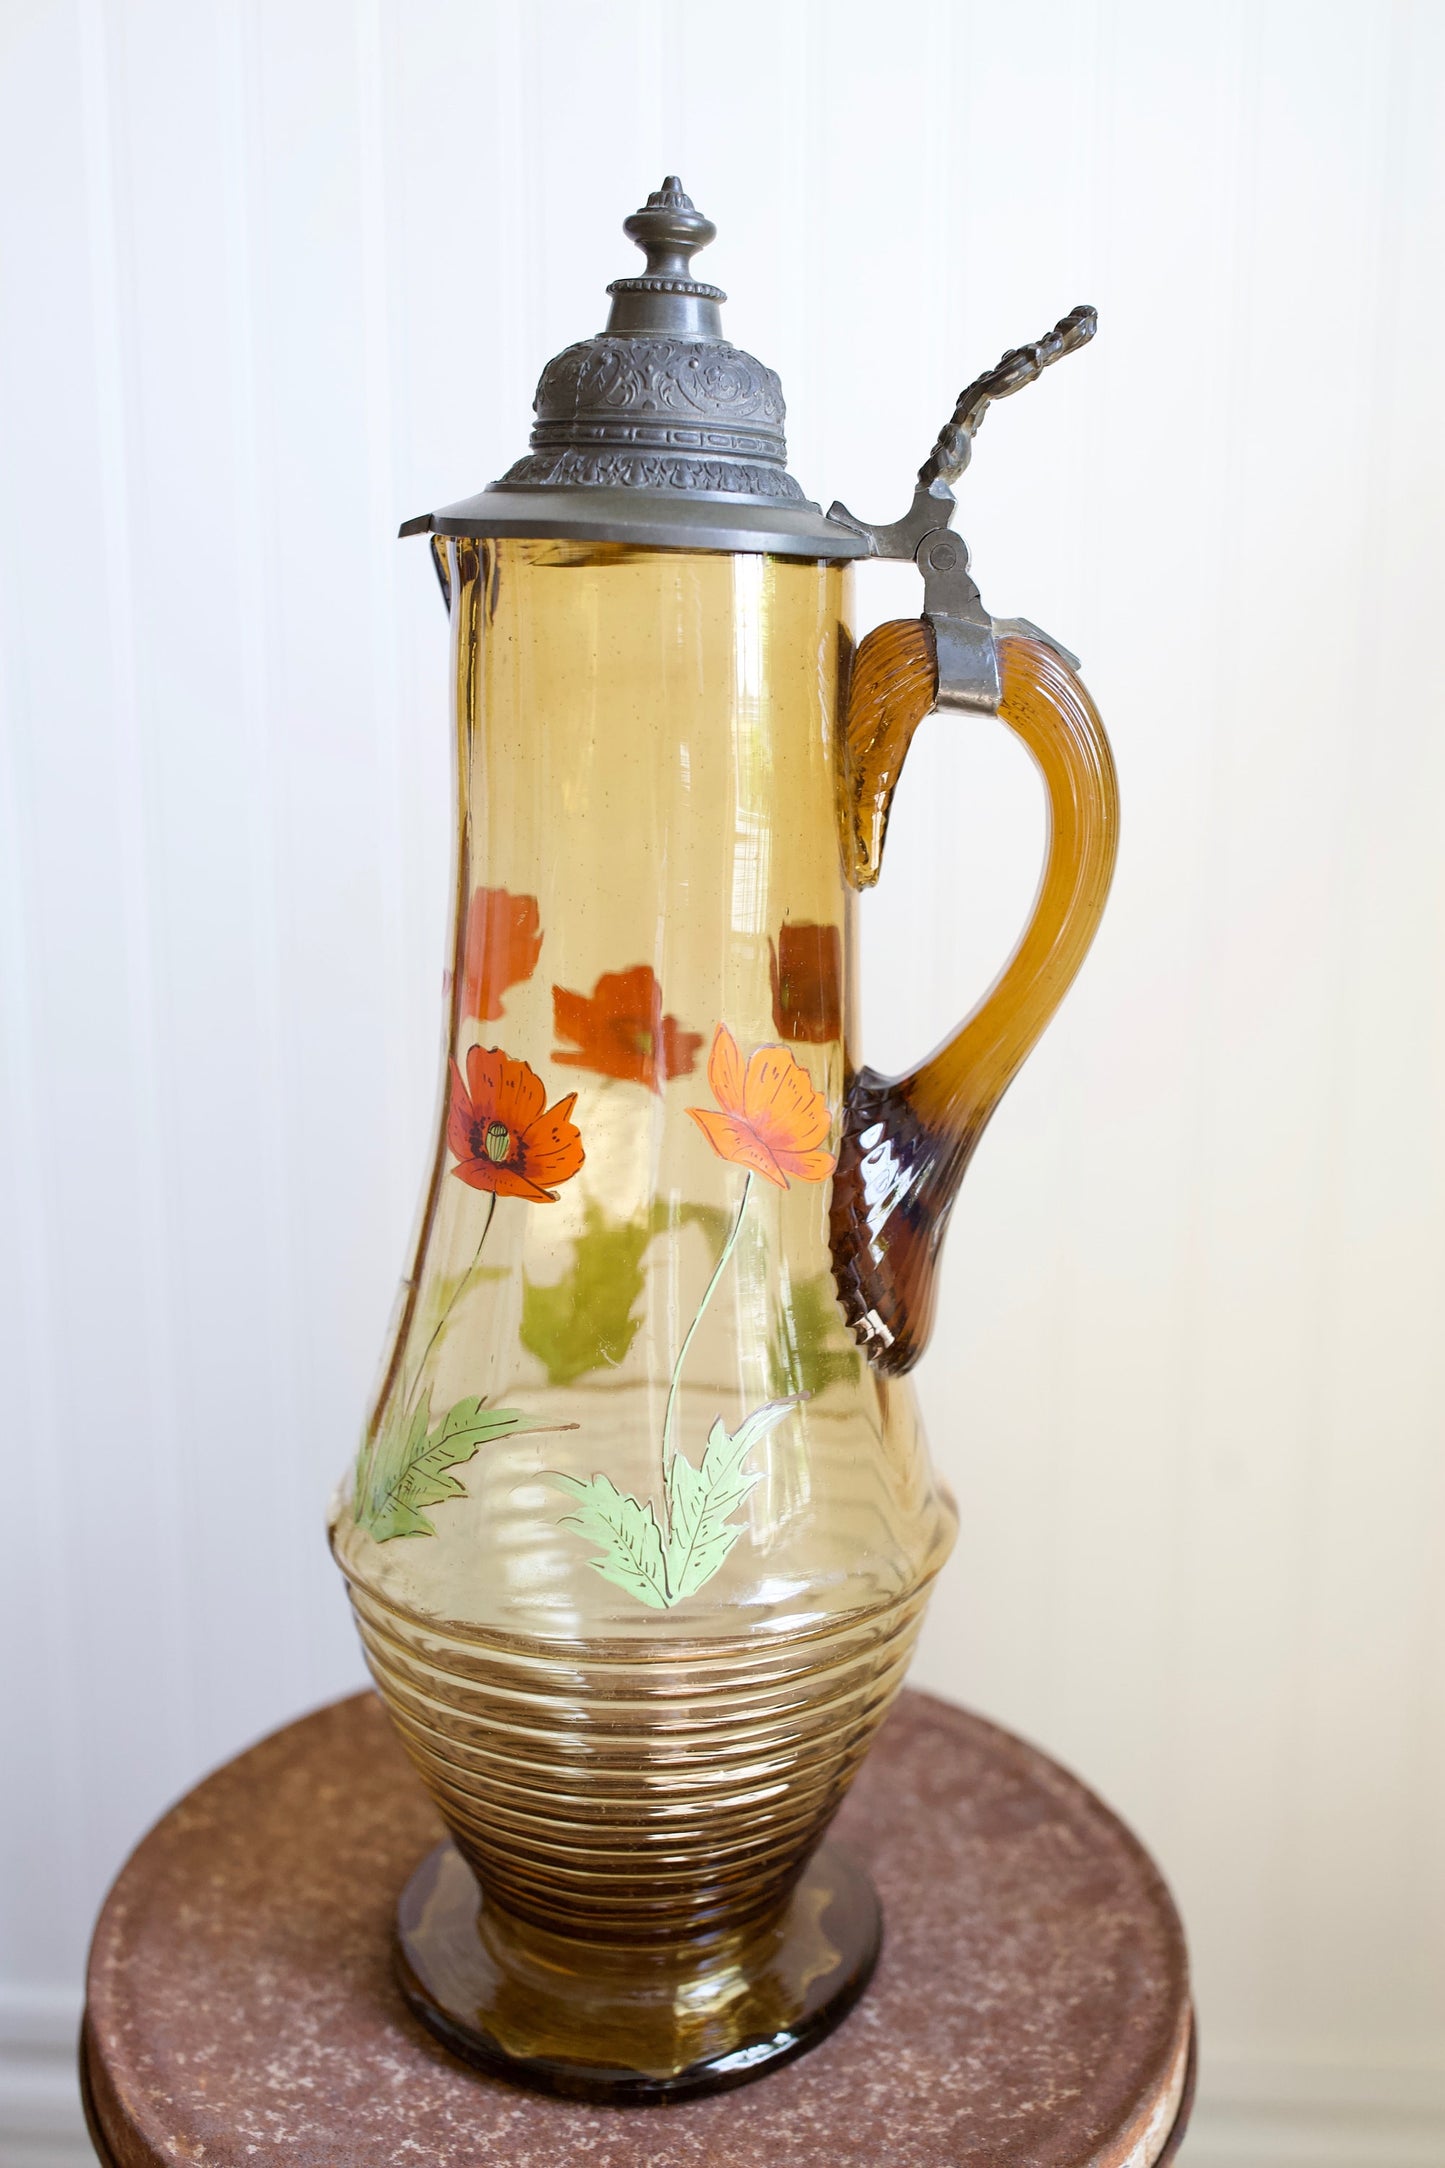 Vintage Amber Glass Decanter Stein - Large Glass Container with Flowers and Metal Lid